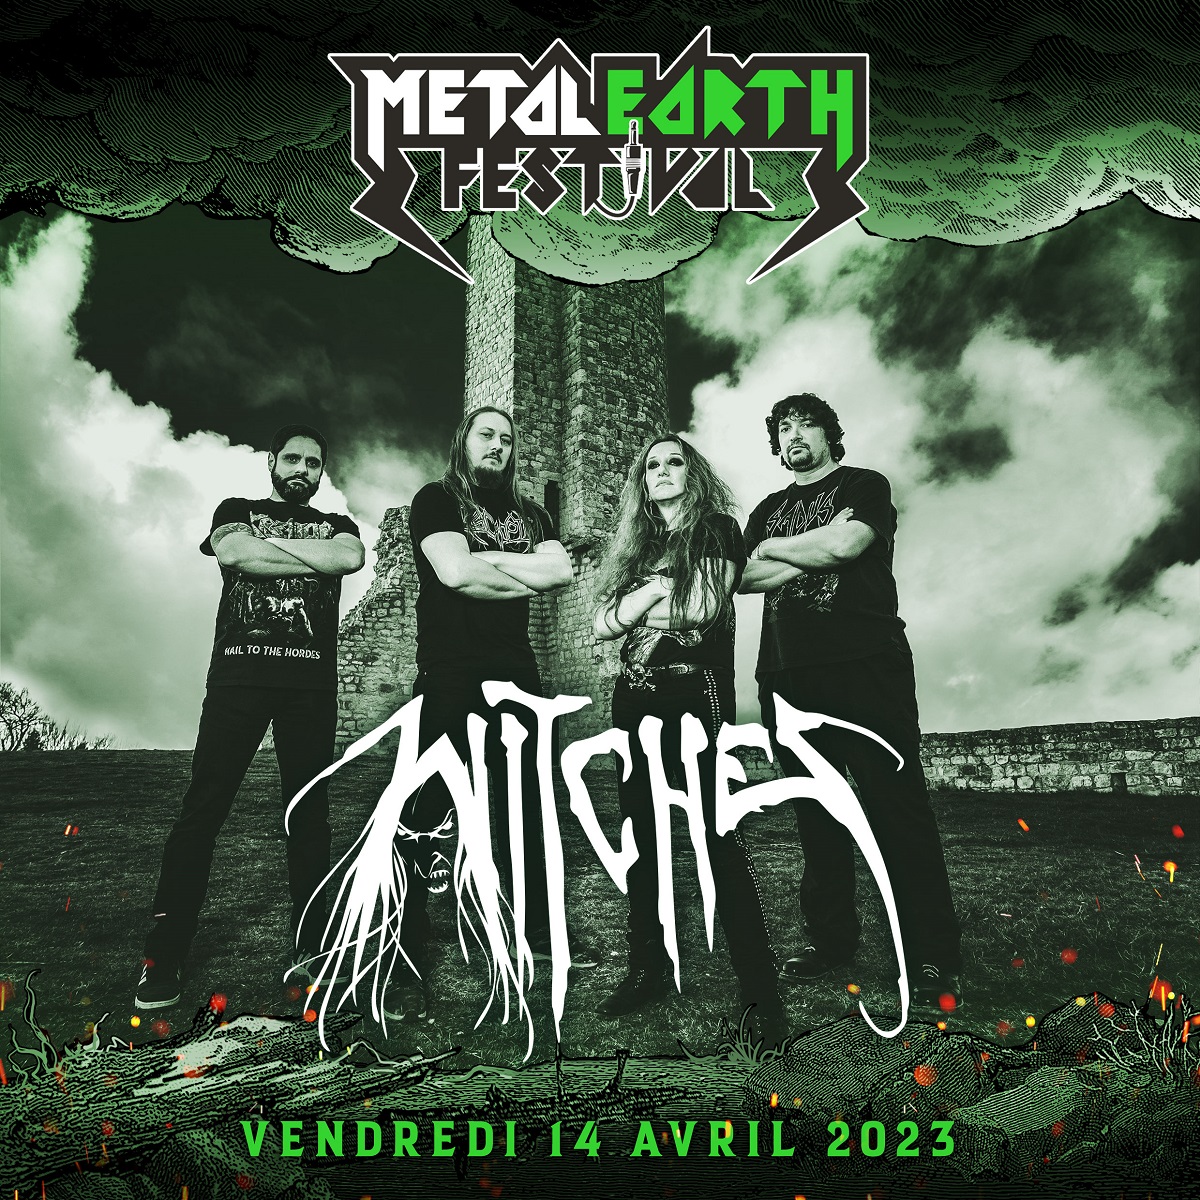 Witches flyer Witches + Despressive Witches + FT-17 @ Metalearth Festival #2 espace Lo Ferr Brest (29-France)